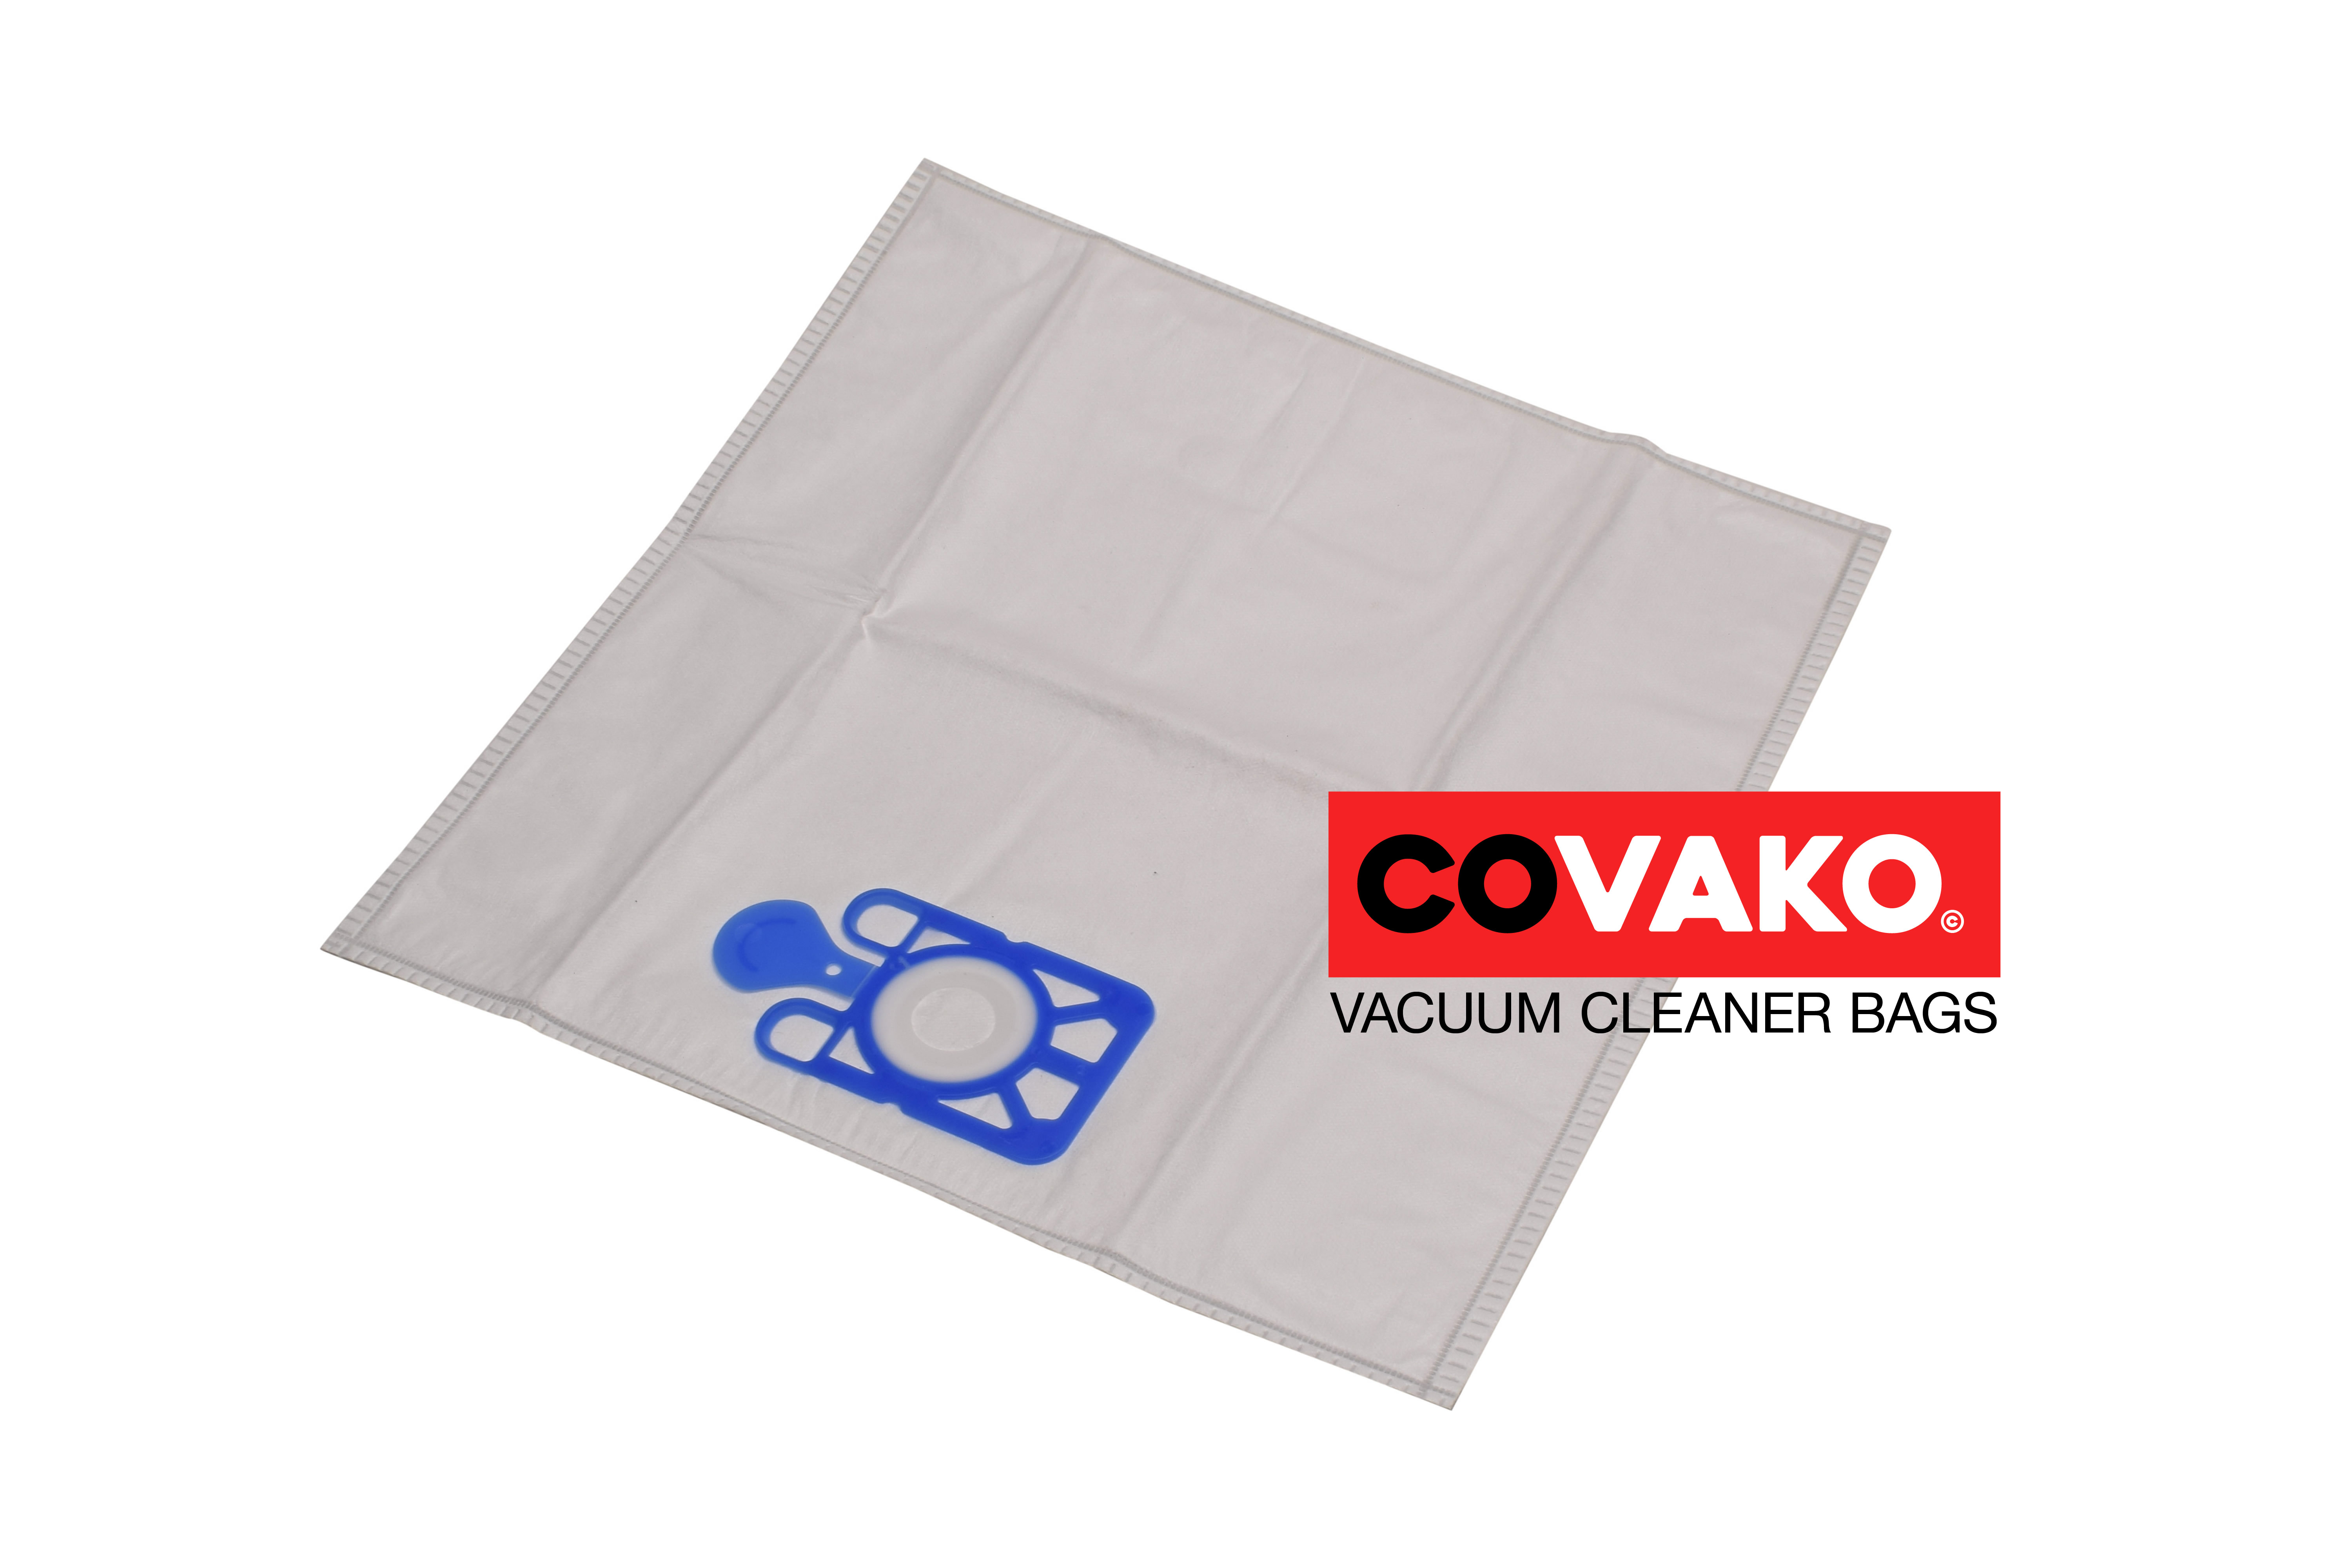 Numatic PVR 200 A / Synthesis - Numatic vacuum cleaner bags